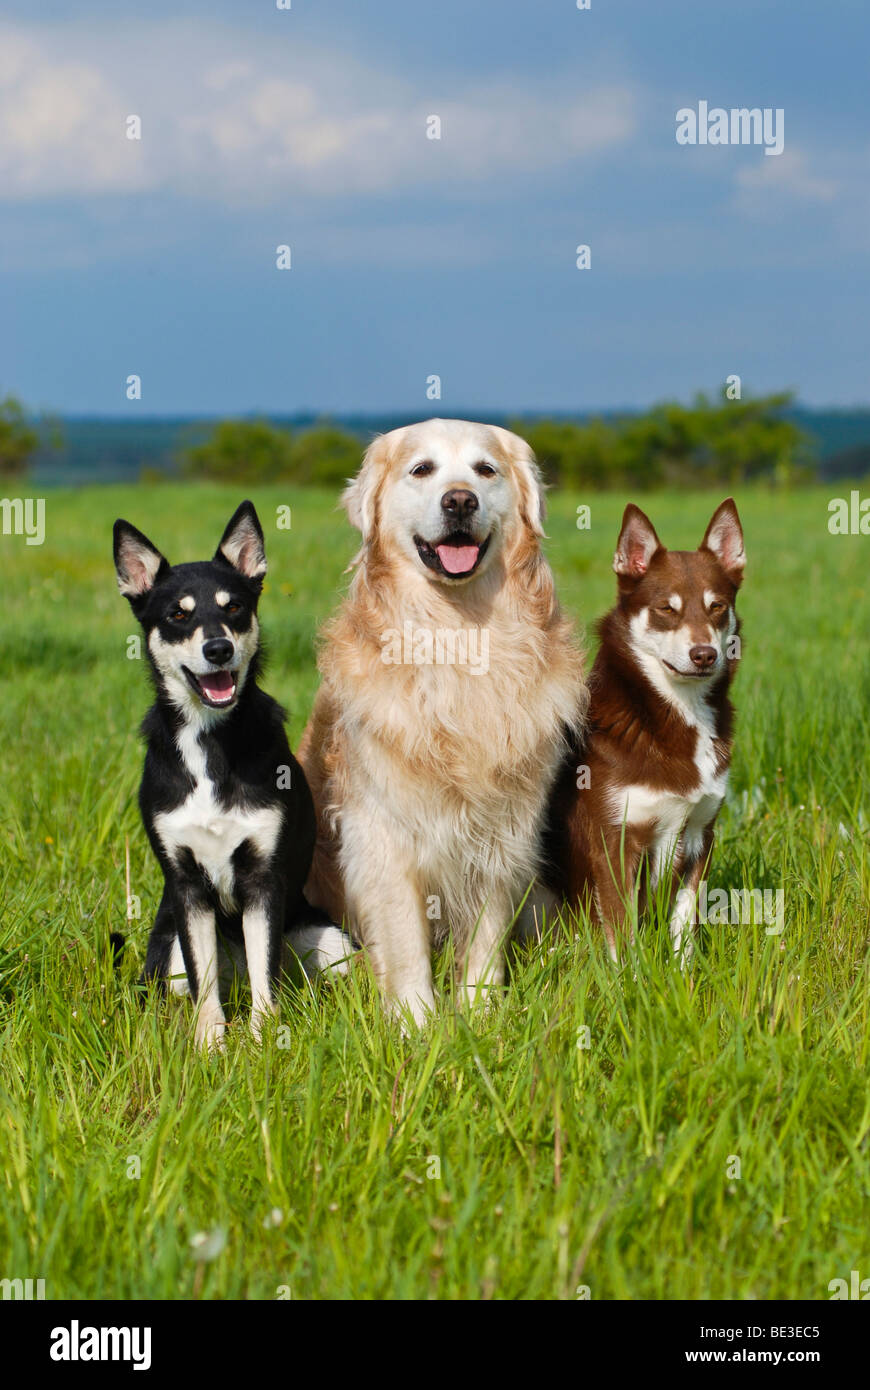 Two Lapponian Herders, Lapland reindeer dogs and Golden Retriever, sitting on a meadow Stock Photo